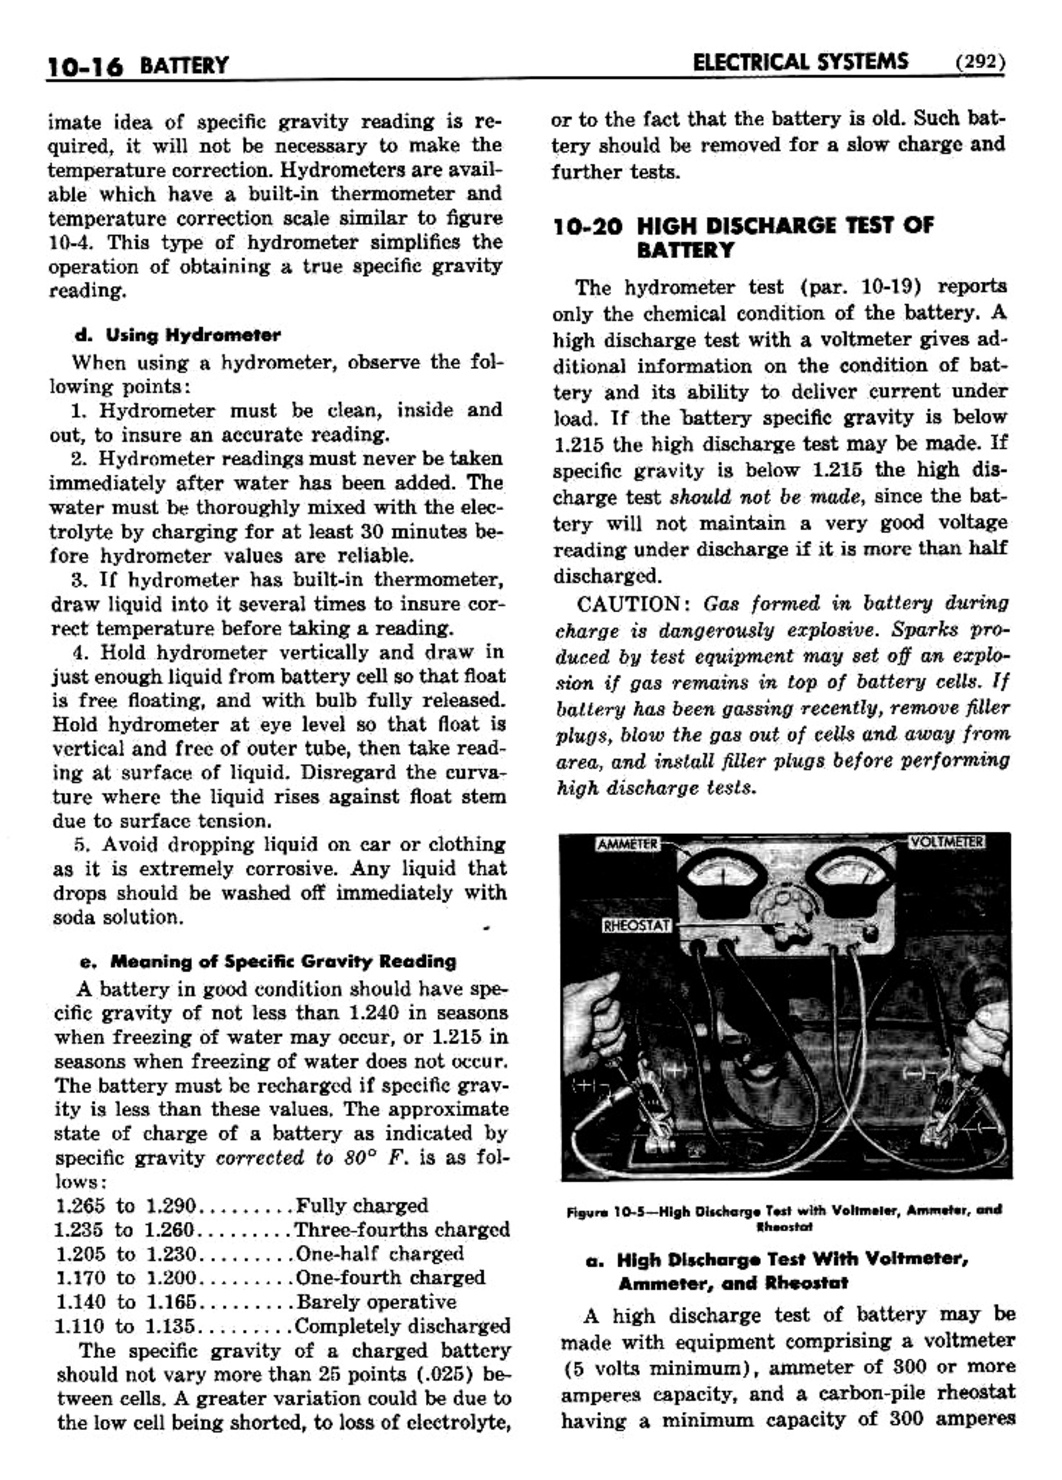 n_11 1948 Buick Shop Manual - Electrical Systems-016-016.jpg